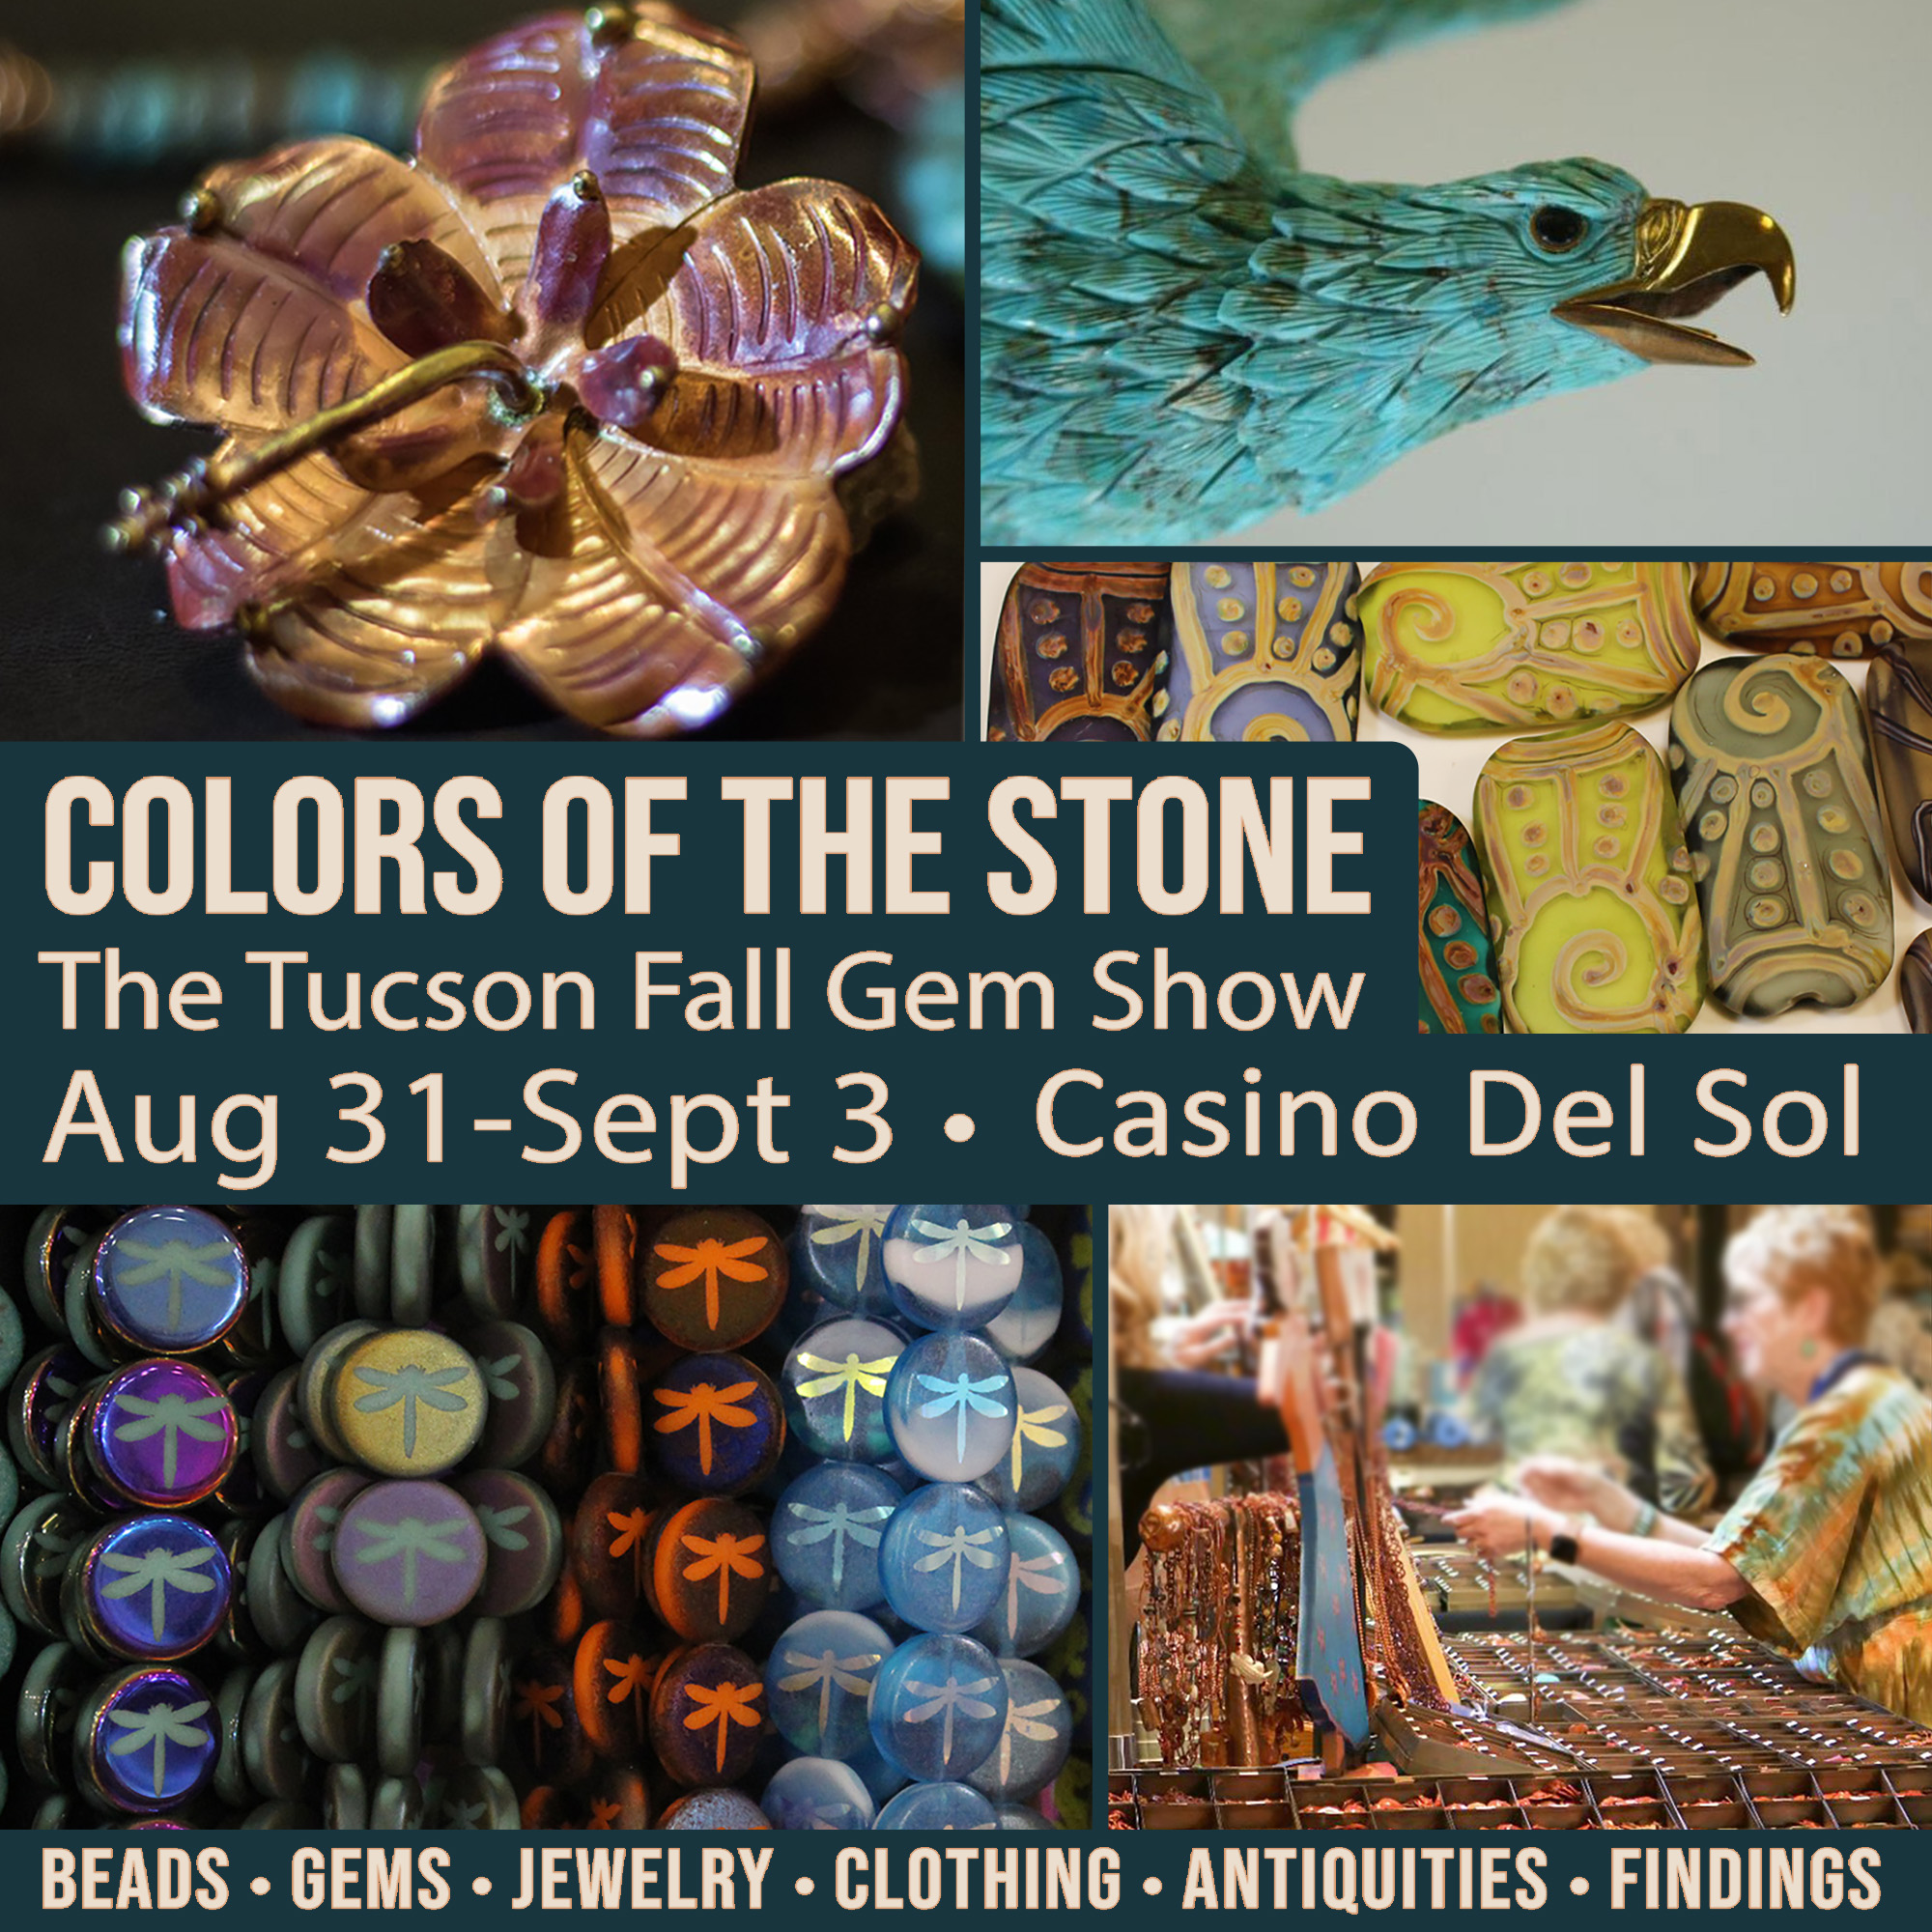 Where to find jewelry created by Tucson makers, This Is Tucson